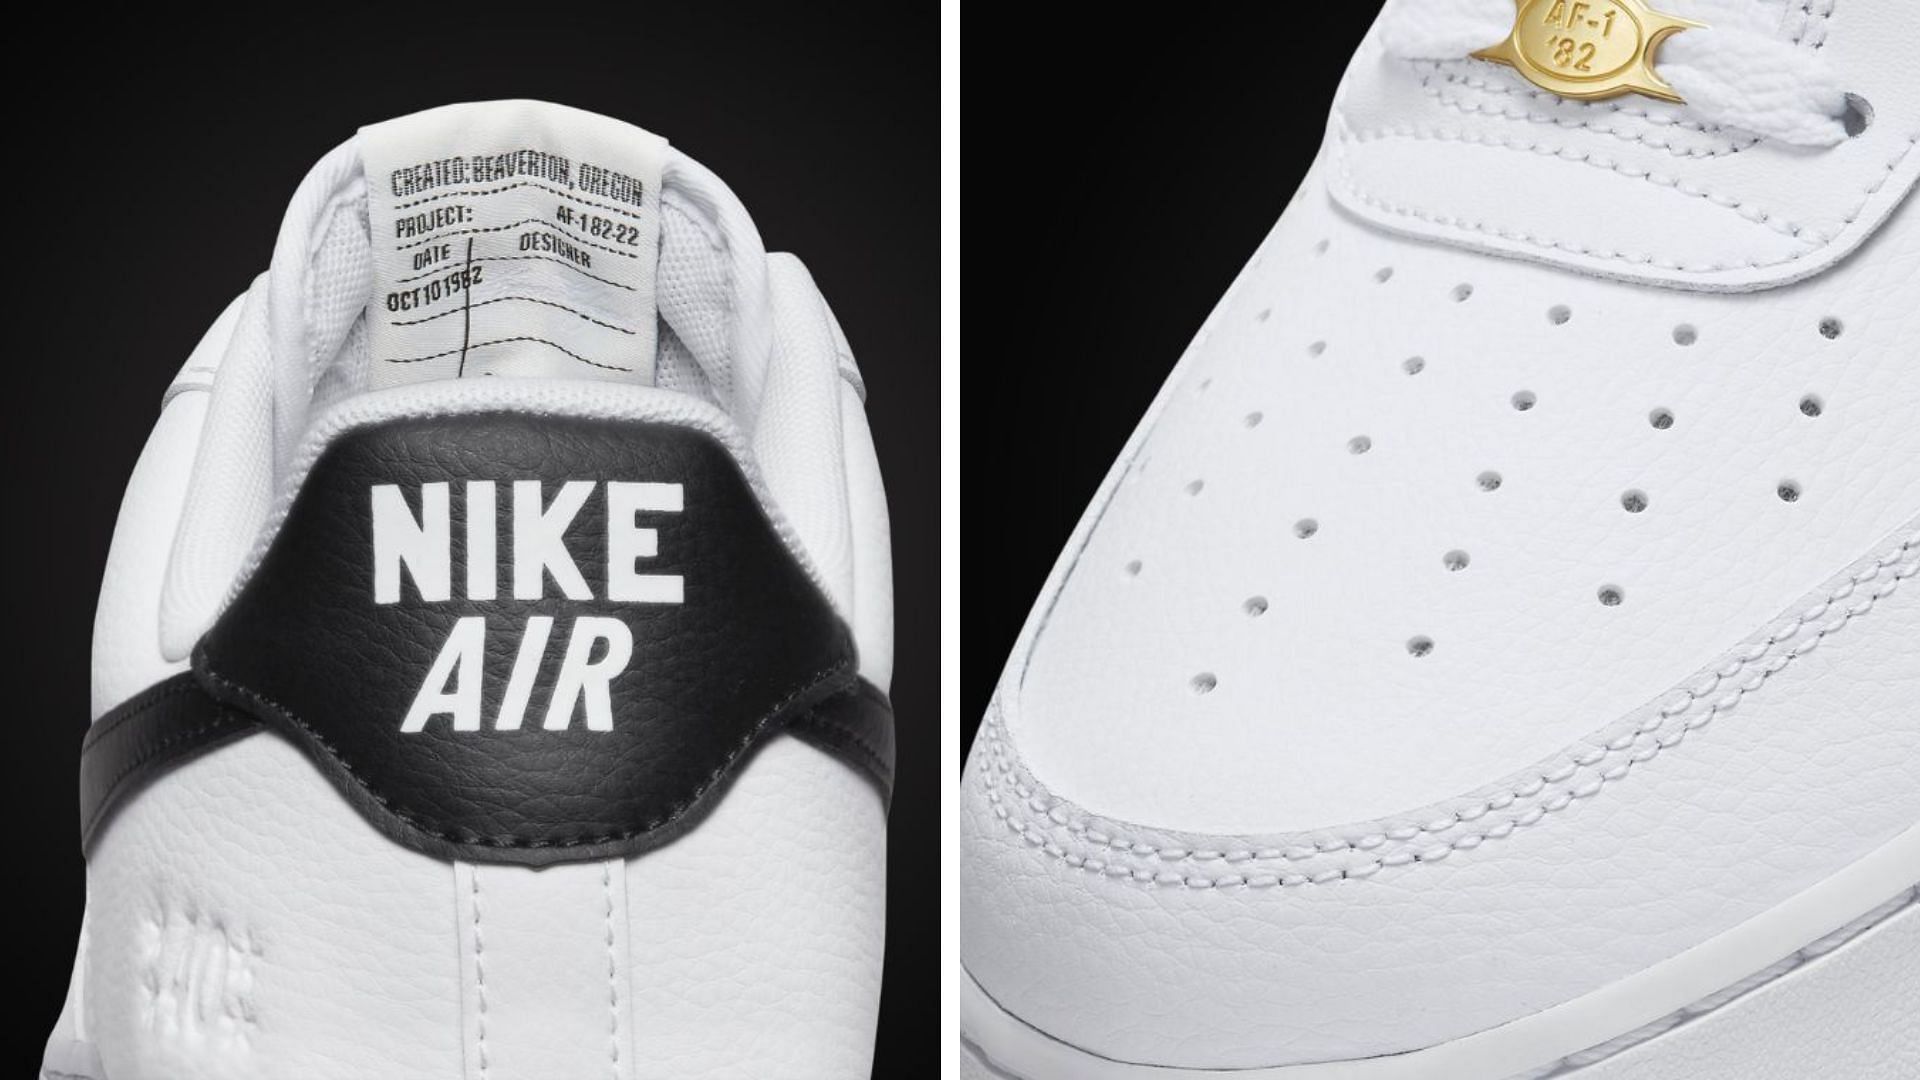 Where to buy Nike Air Force 1 Low “White Black” shoes? Price, release date,  and more details explored